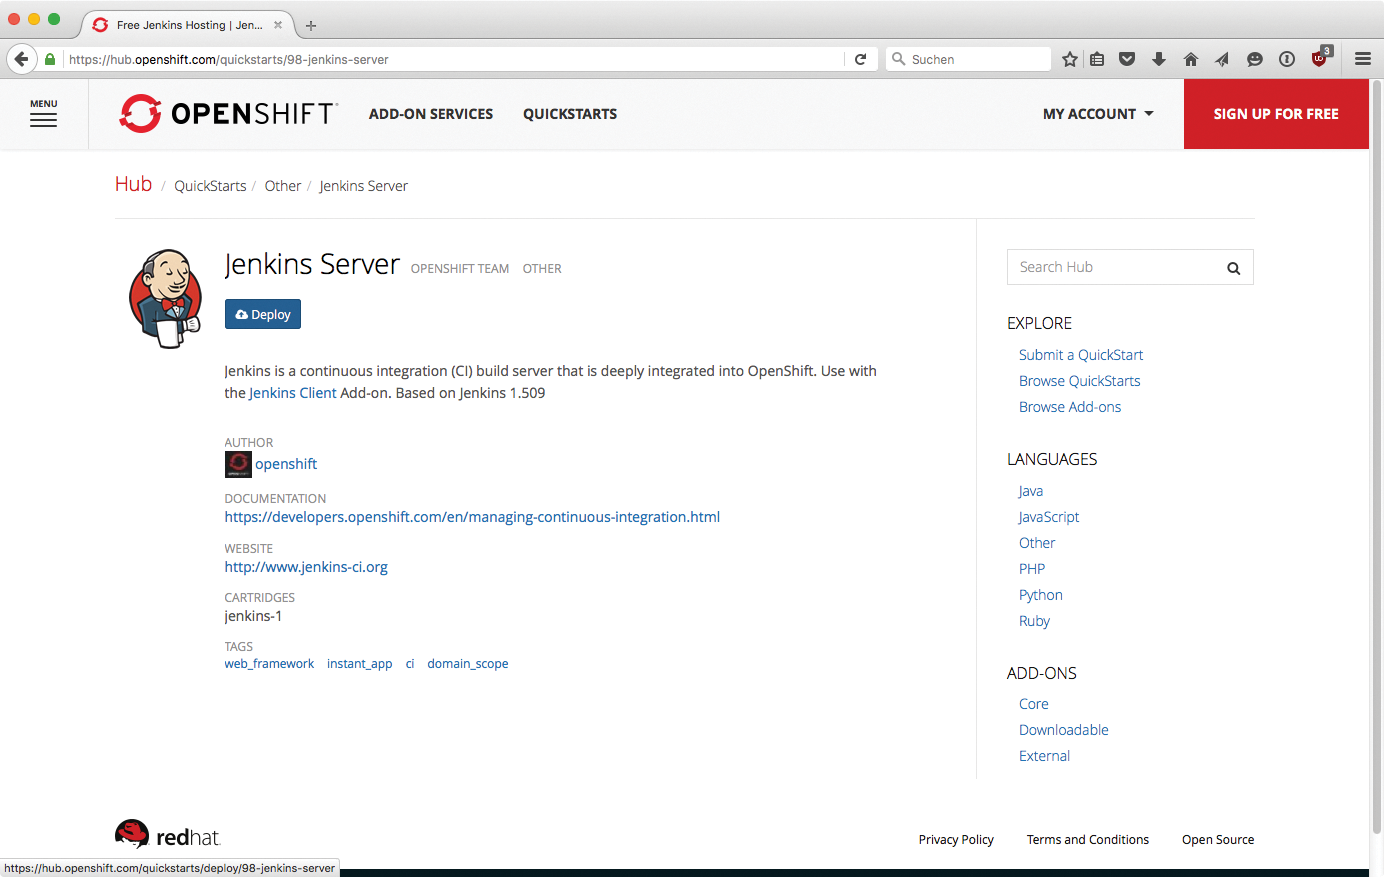 On the OpenShift Hub, Red Hat provides applications that can be rolled out as add-ons. 